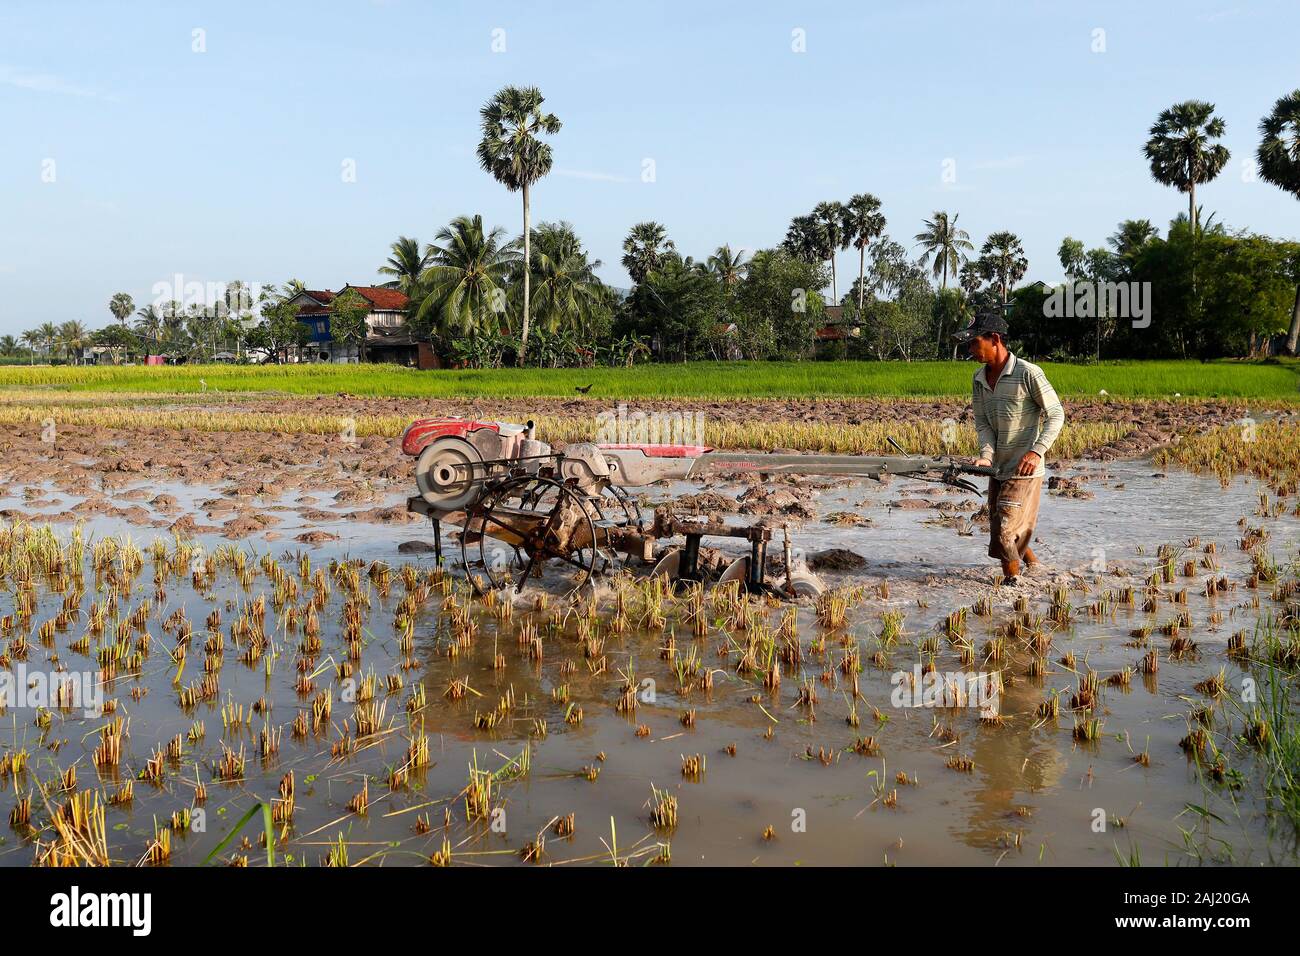 Asian farmer plowing rice field with a tractor, Kep, Cambodia, Indochina, Southeast Asia, Asia Stock Photo